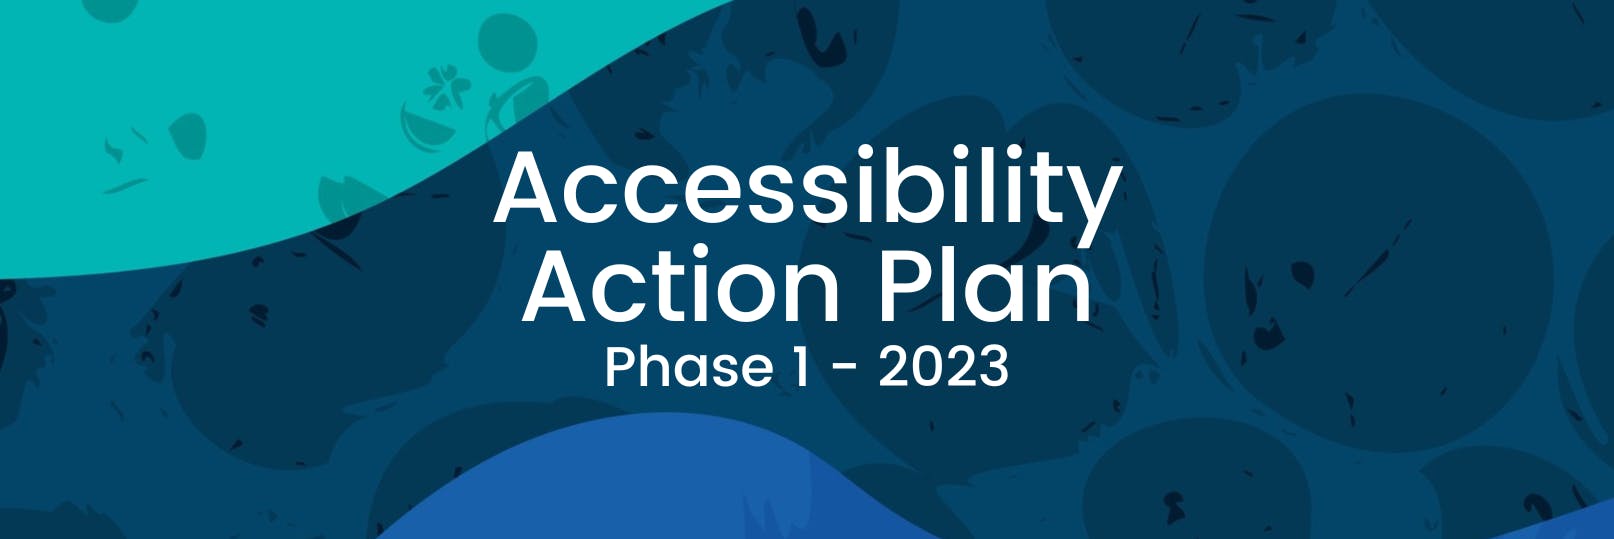 A colourful banner in shades of blue with the text "Accessibility Action Plan 2023" over top.